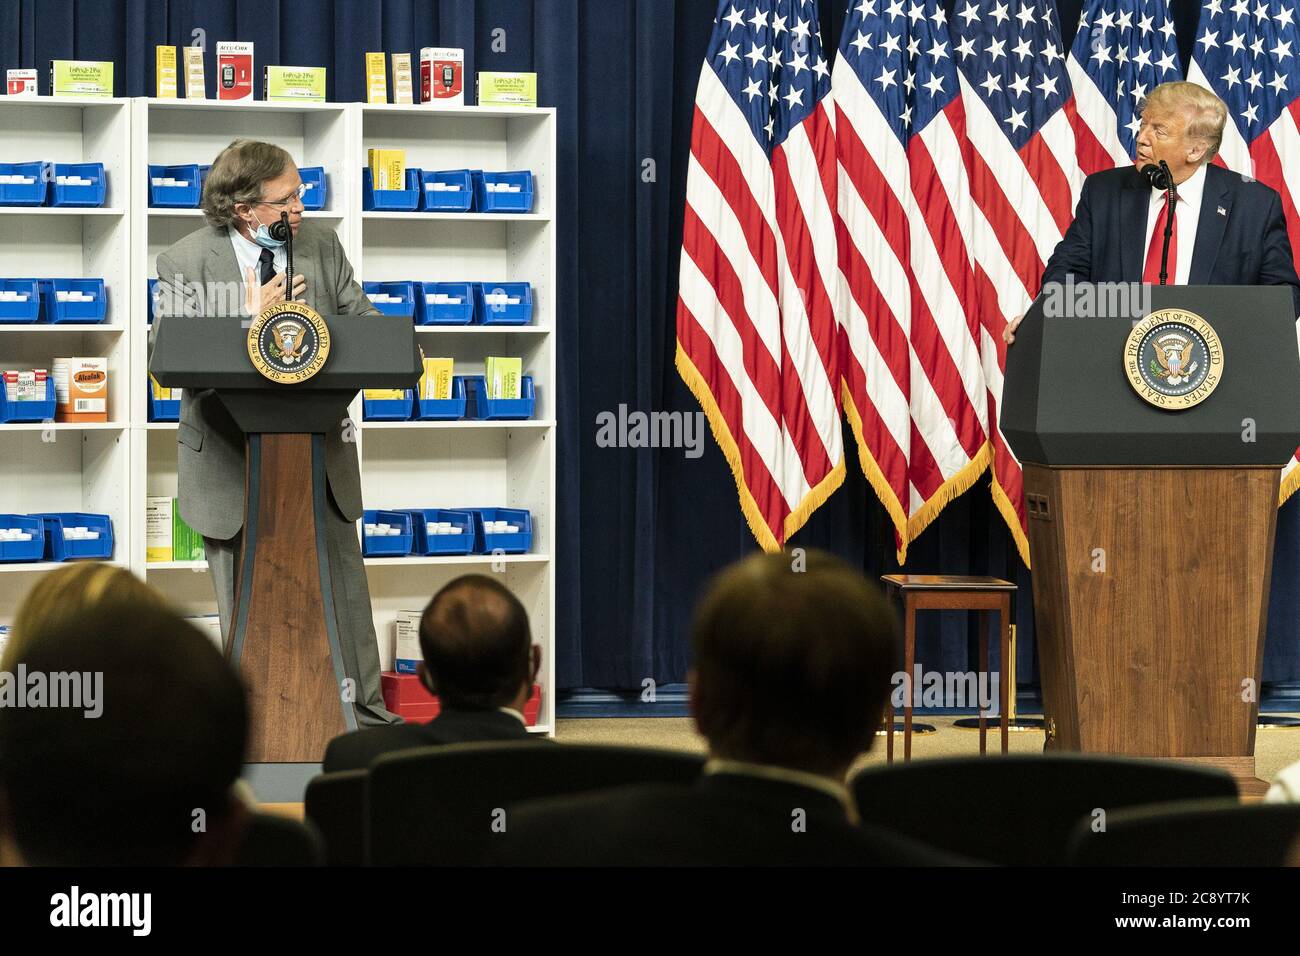 Washington, United States Of America. 24th July, 2020. President Donald J. Trump listens as guest Paul Madden, a diabetic who uses insulin, delivers remarks before the PresidentÕs signing of Executive Orders on Lowering Drug Prices Friday, July 24, 2020, in the South Court Auditorium of the Eisenhower Executive Office Building at the White House People: President Donald Trump, Paul Madden Credit: Storms Media Group/Alamy Live News Stock Photo